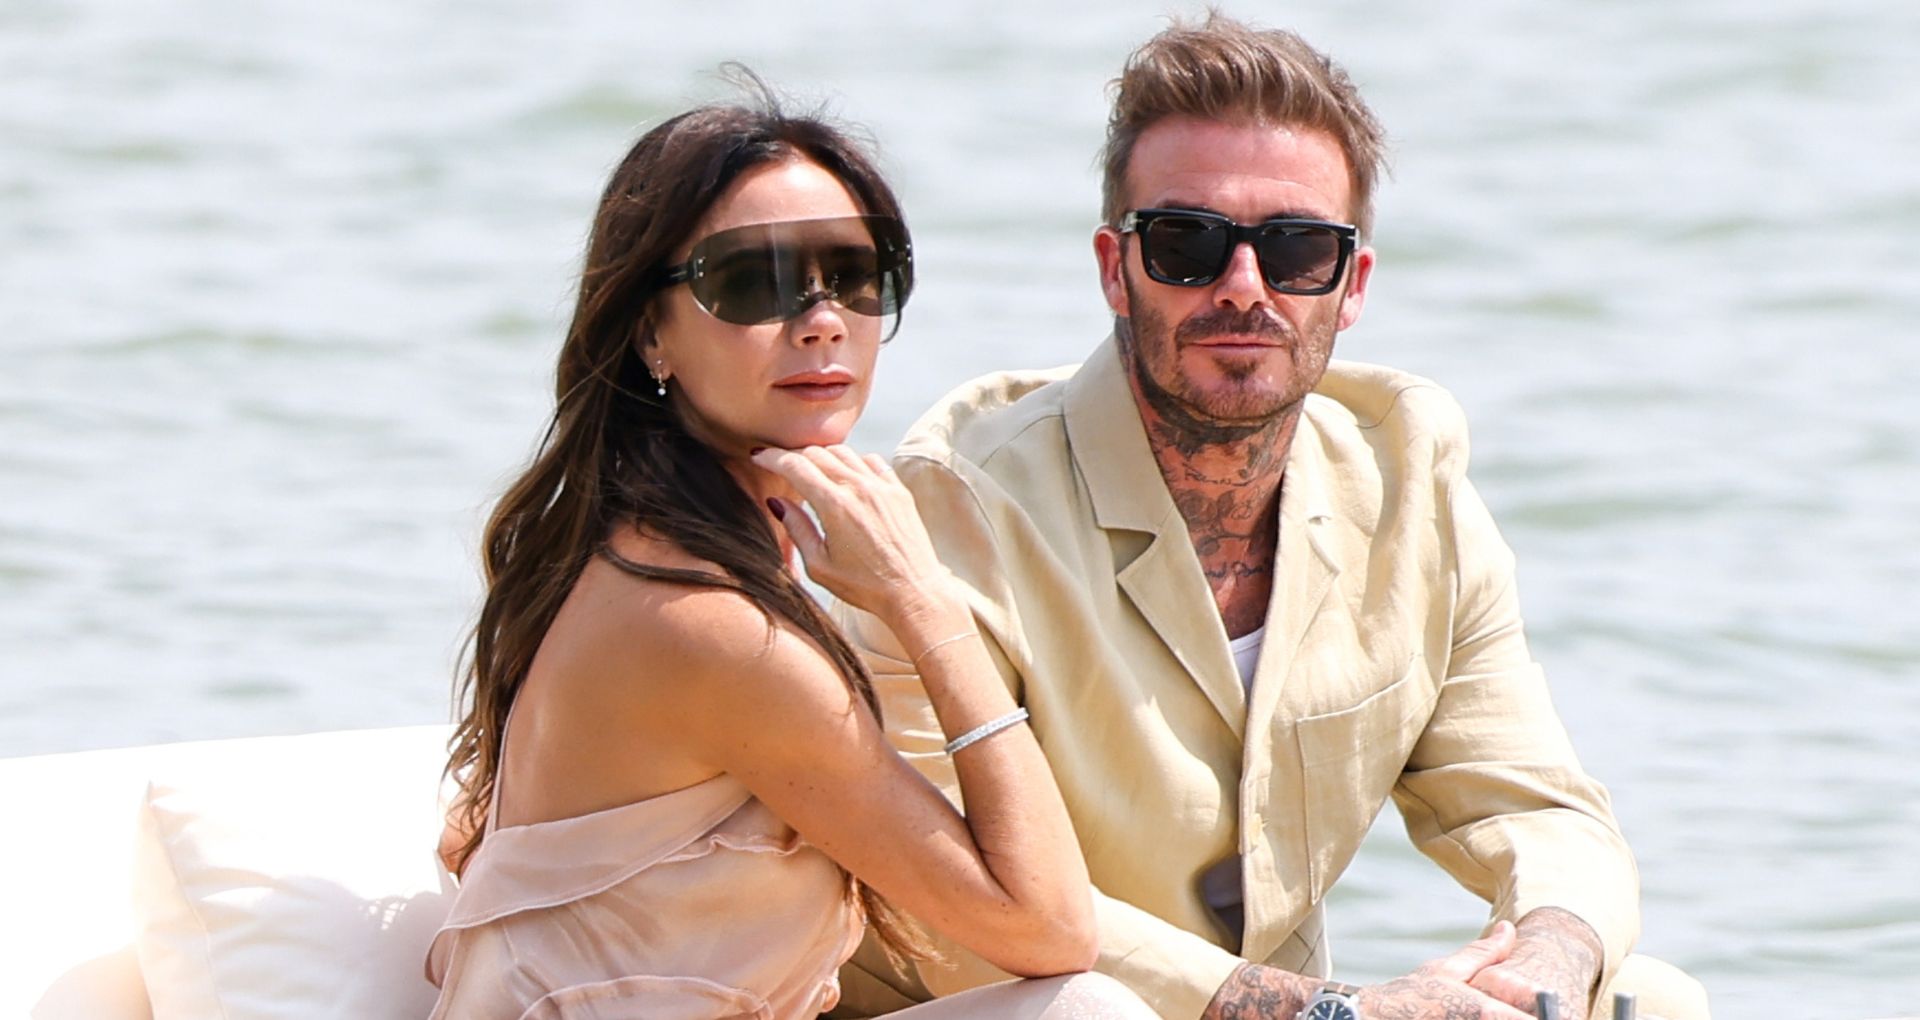 Inside All Four Of David & Victoria Beckham’s Luxury Homes